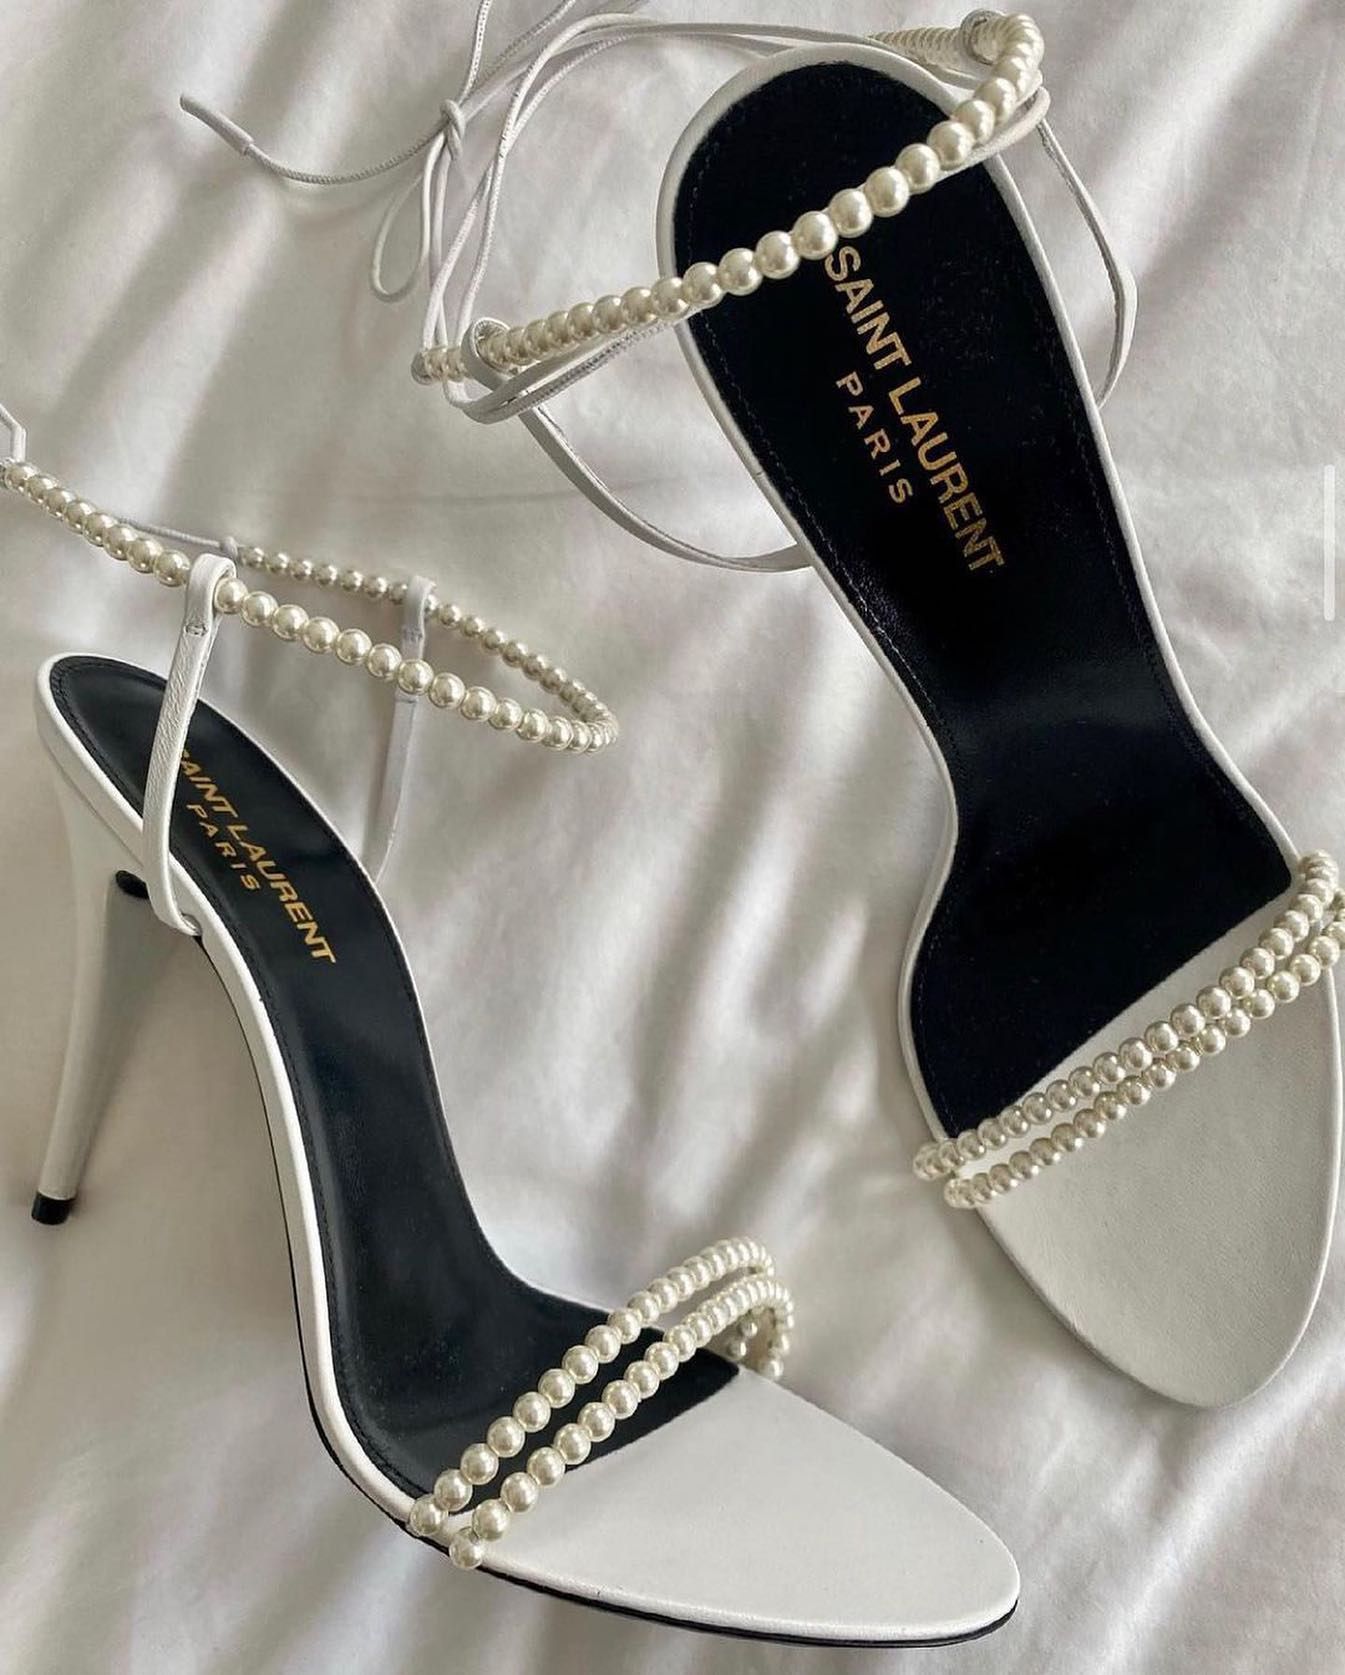 20 Gorgeous Wedding Shoes For Every Bride: Saint Laurent Pearl Heels